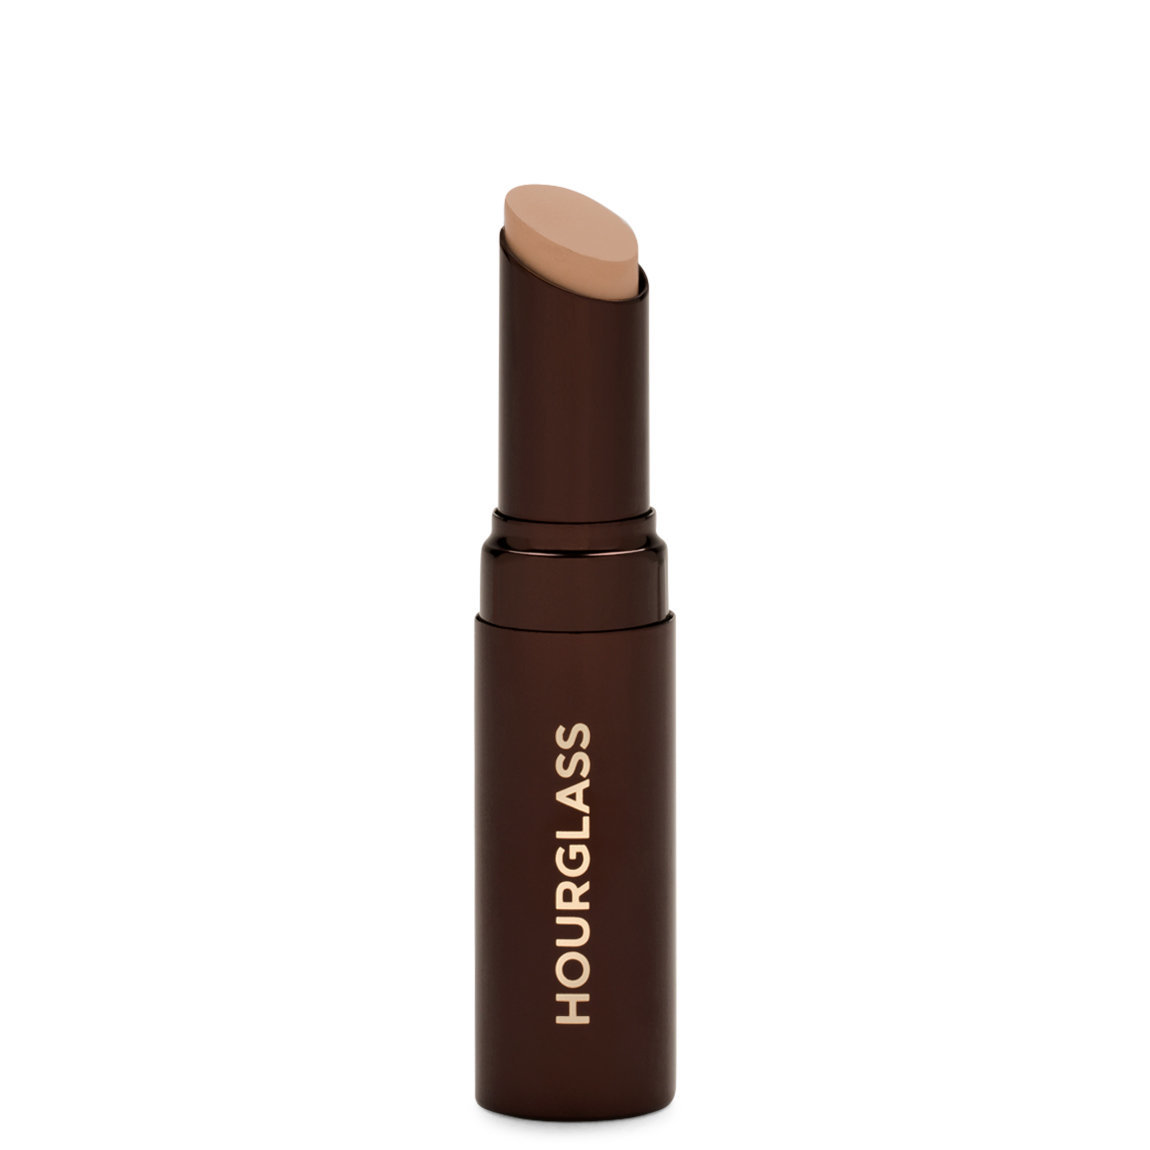 comparison to hourglass concealer